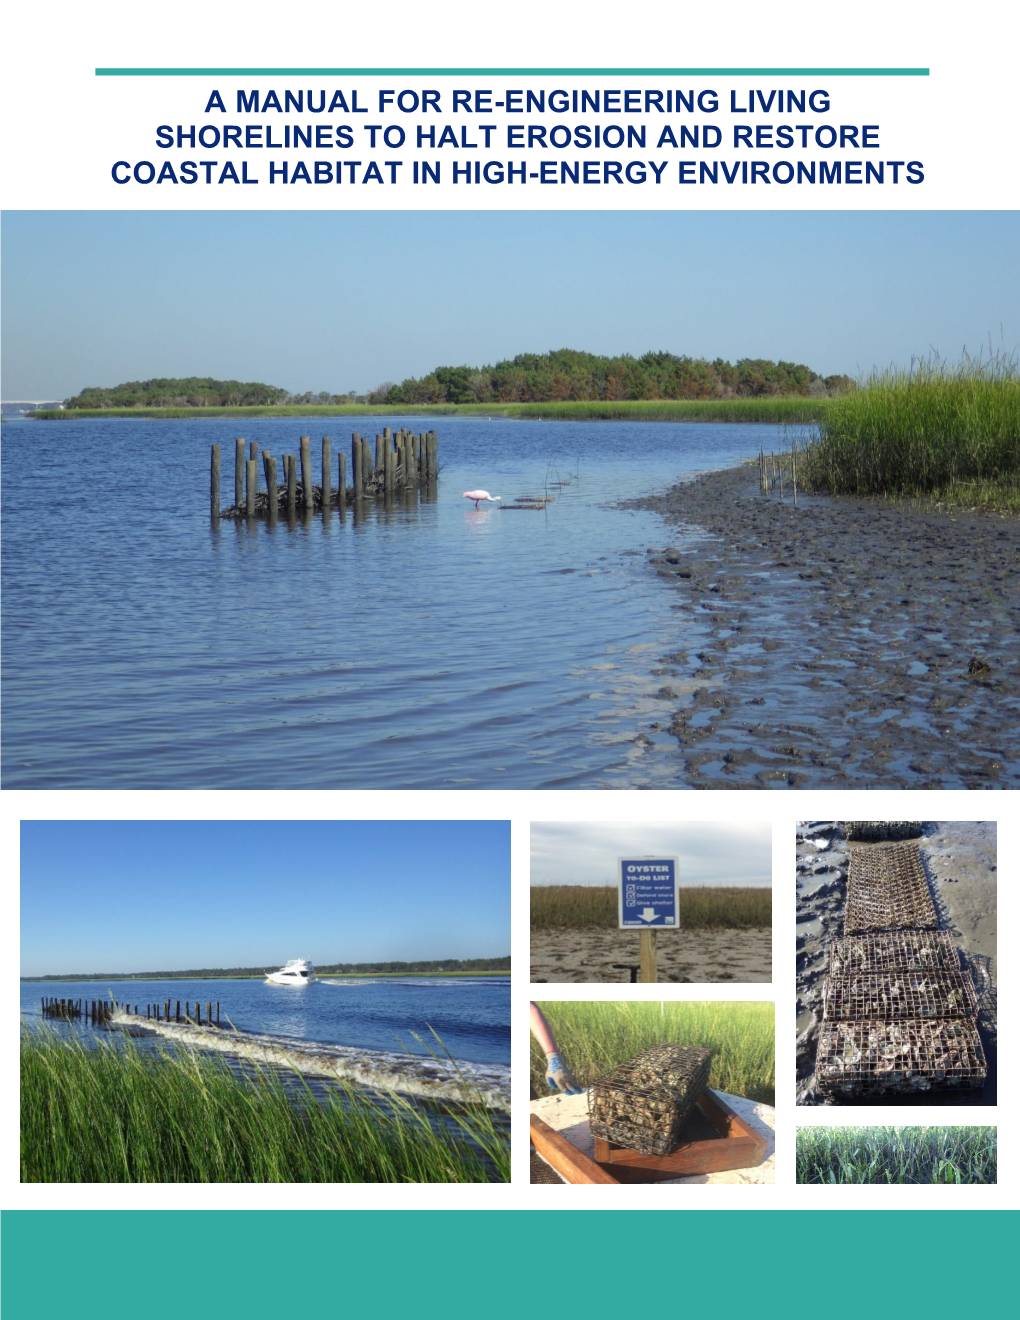 A Manual for Re-Engineering Living Shorelines to Halt Erosion and Restore Coastal Habitat in High- Energy Environments